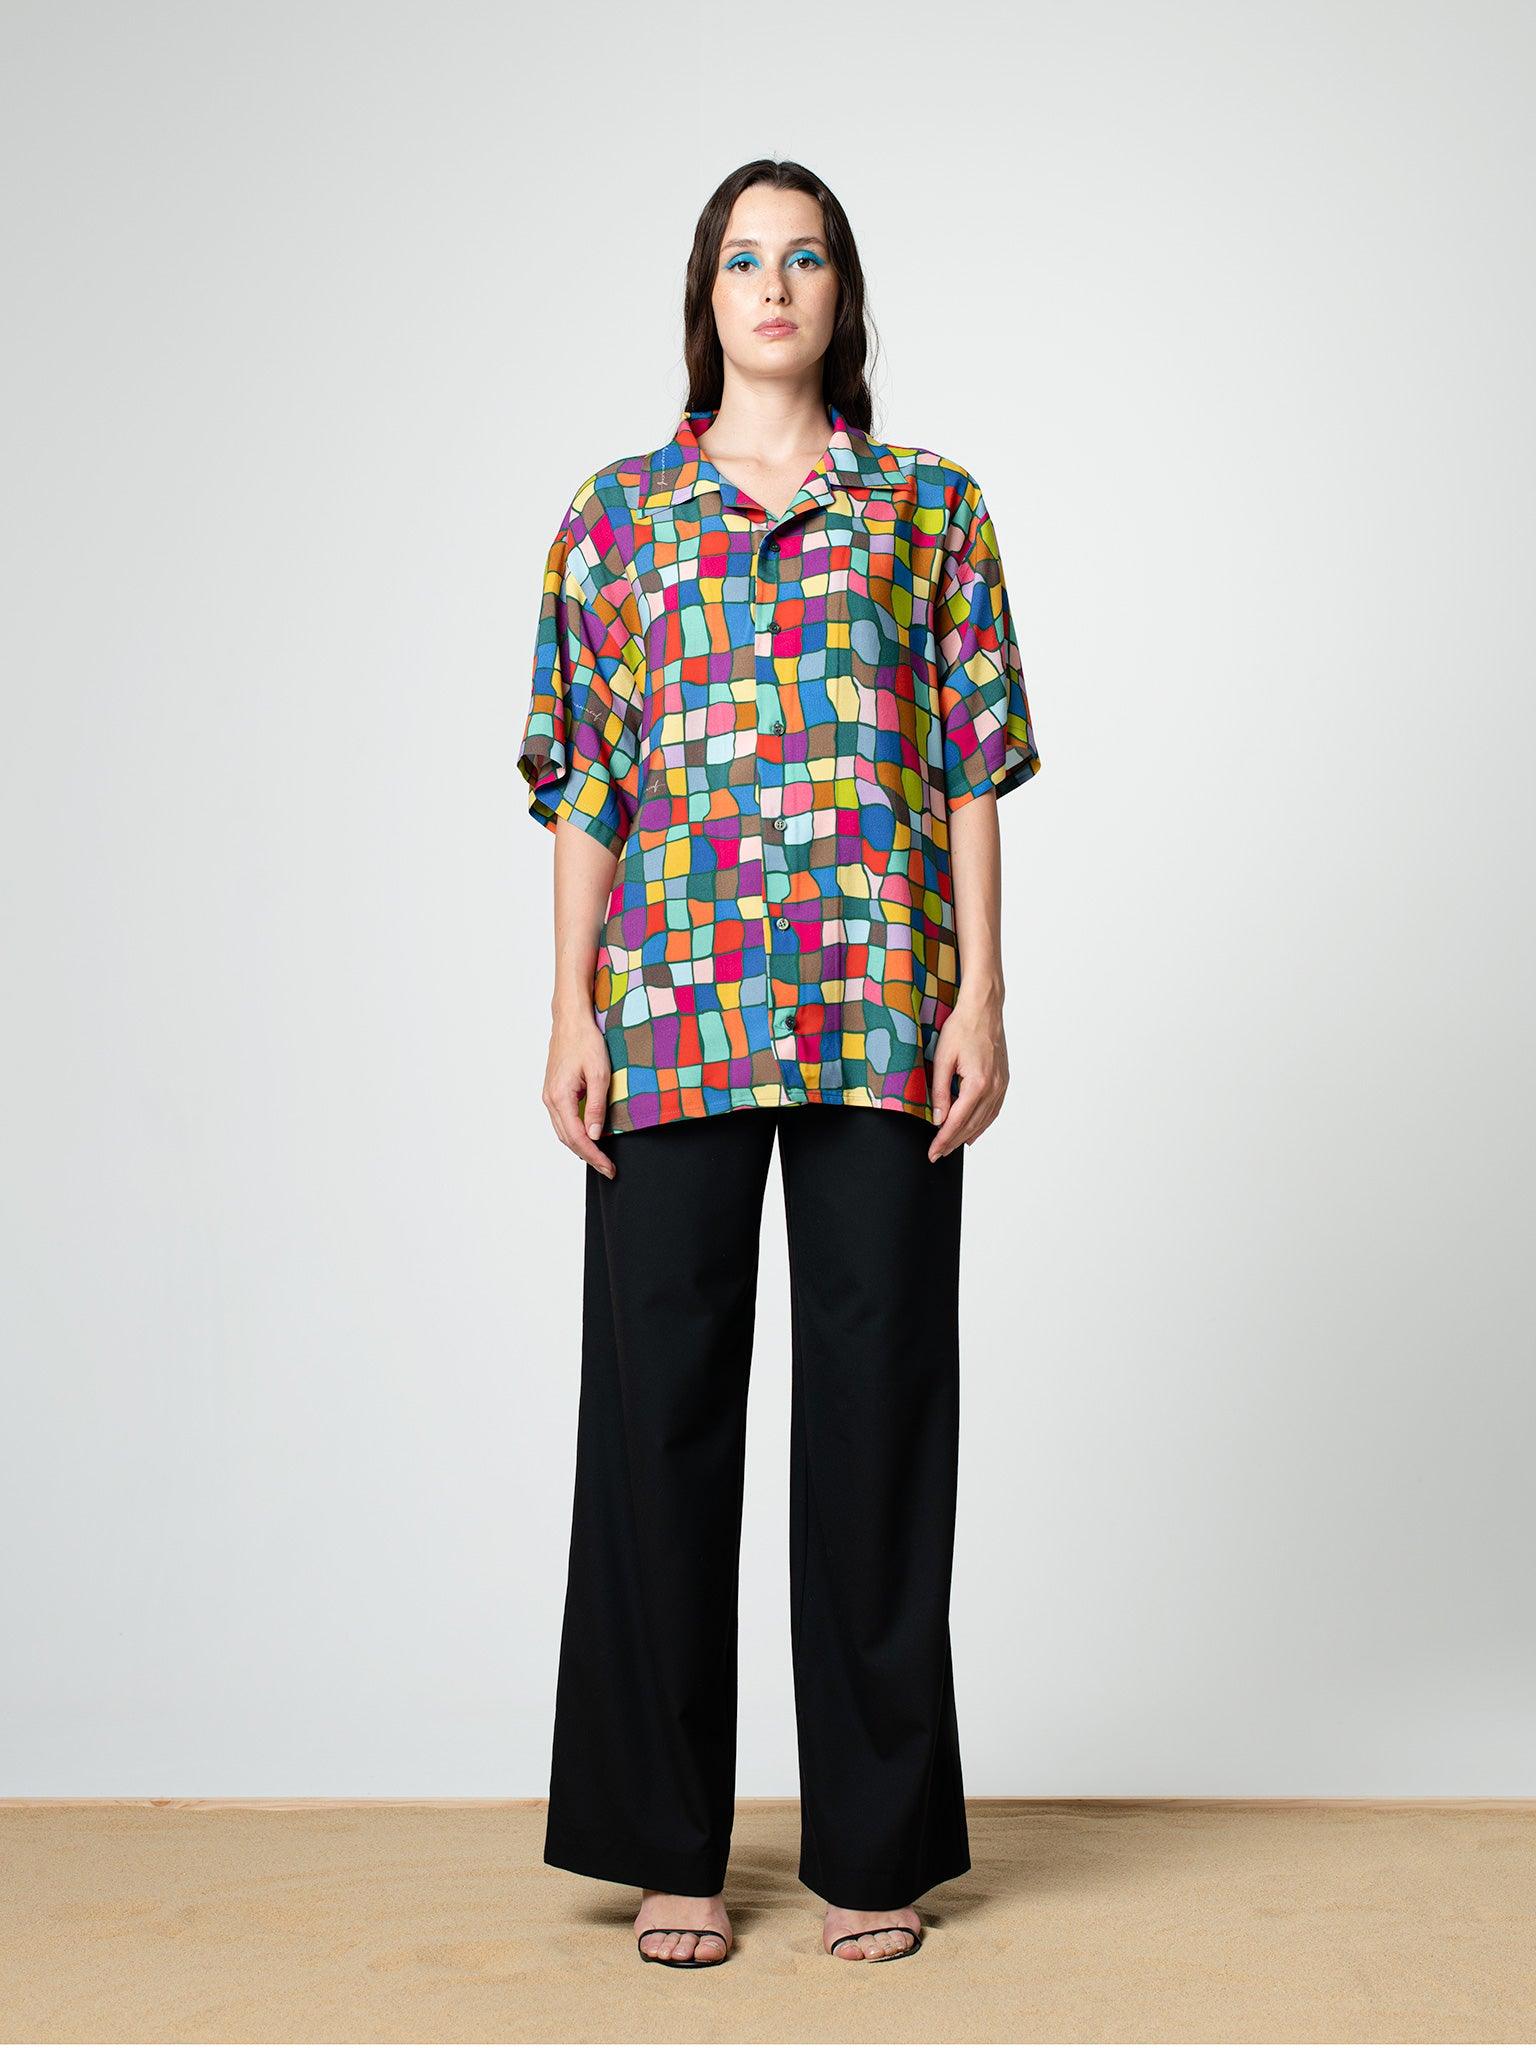 Multicolor Bowling Shirt - SOON TO BE ANNOUNCED